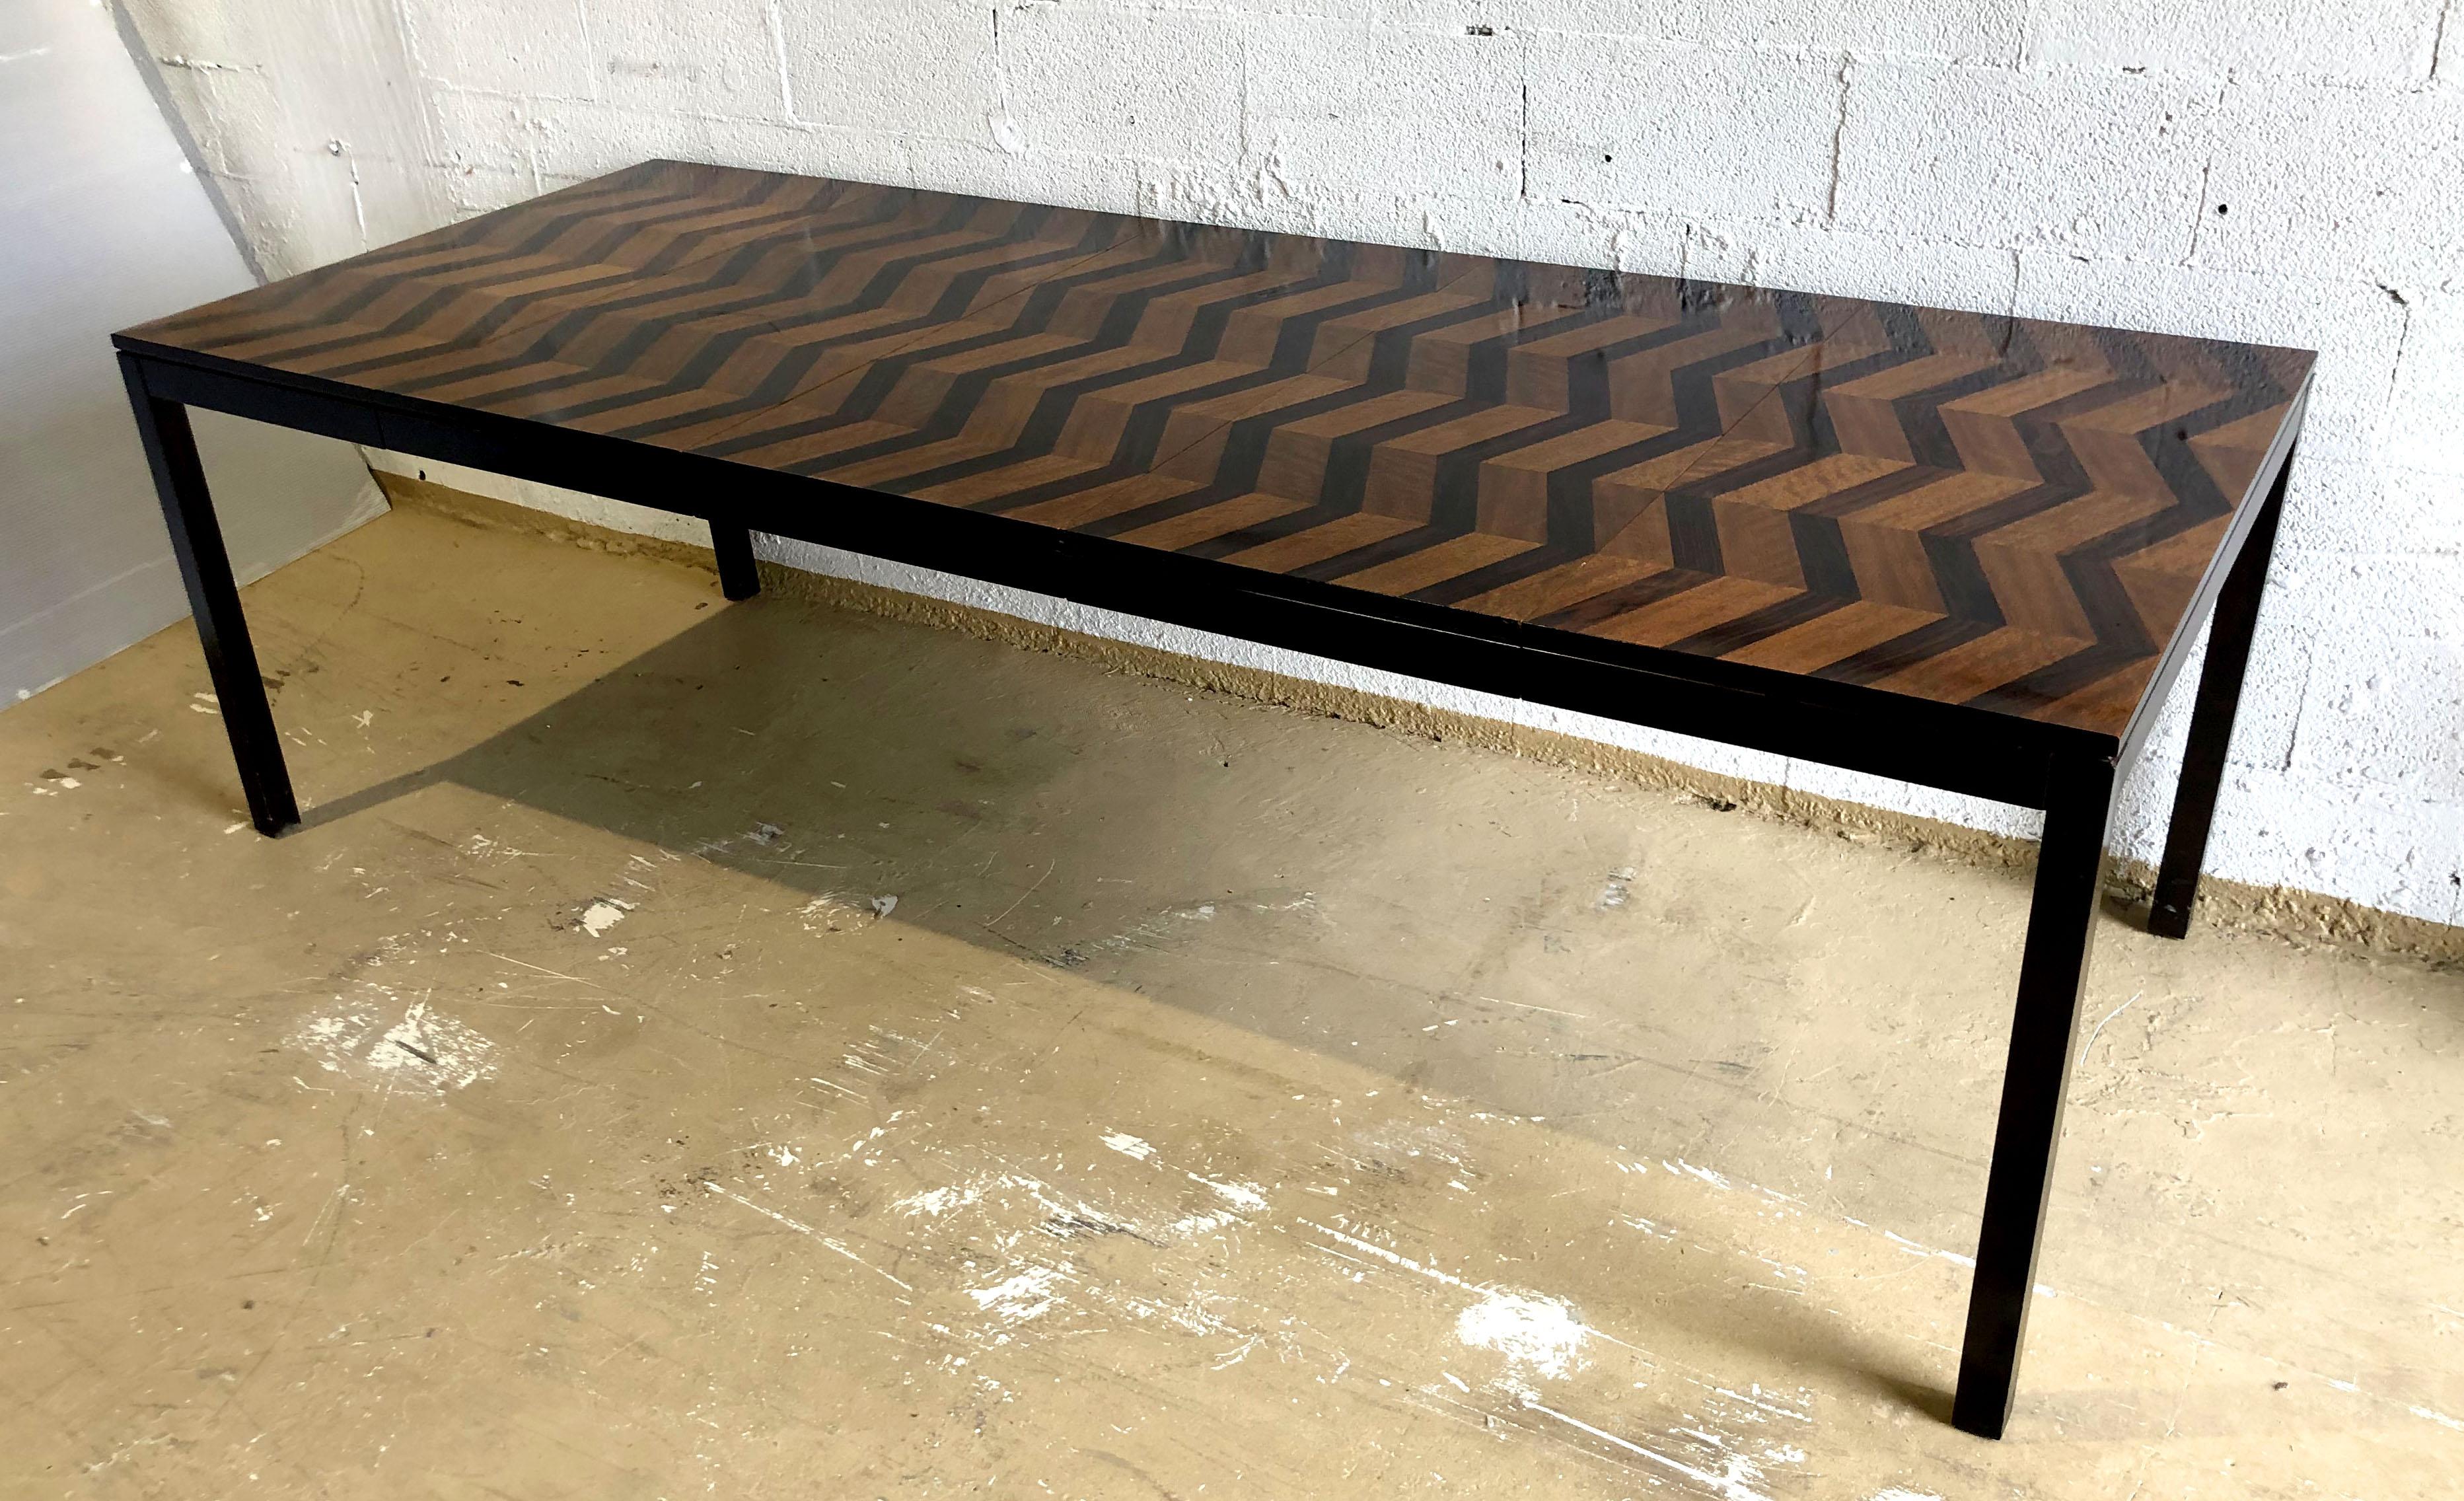 The top with inlaid chevron pattern, with extension leaves, over ebonised parsons legs- this rare model table was created for directional furniture company in 1978.